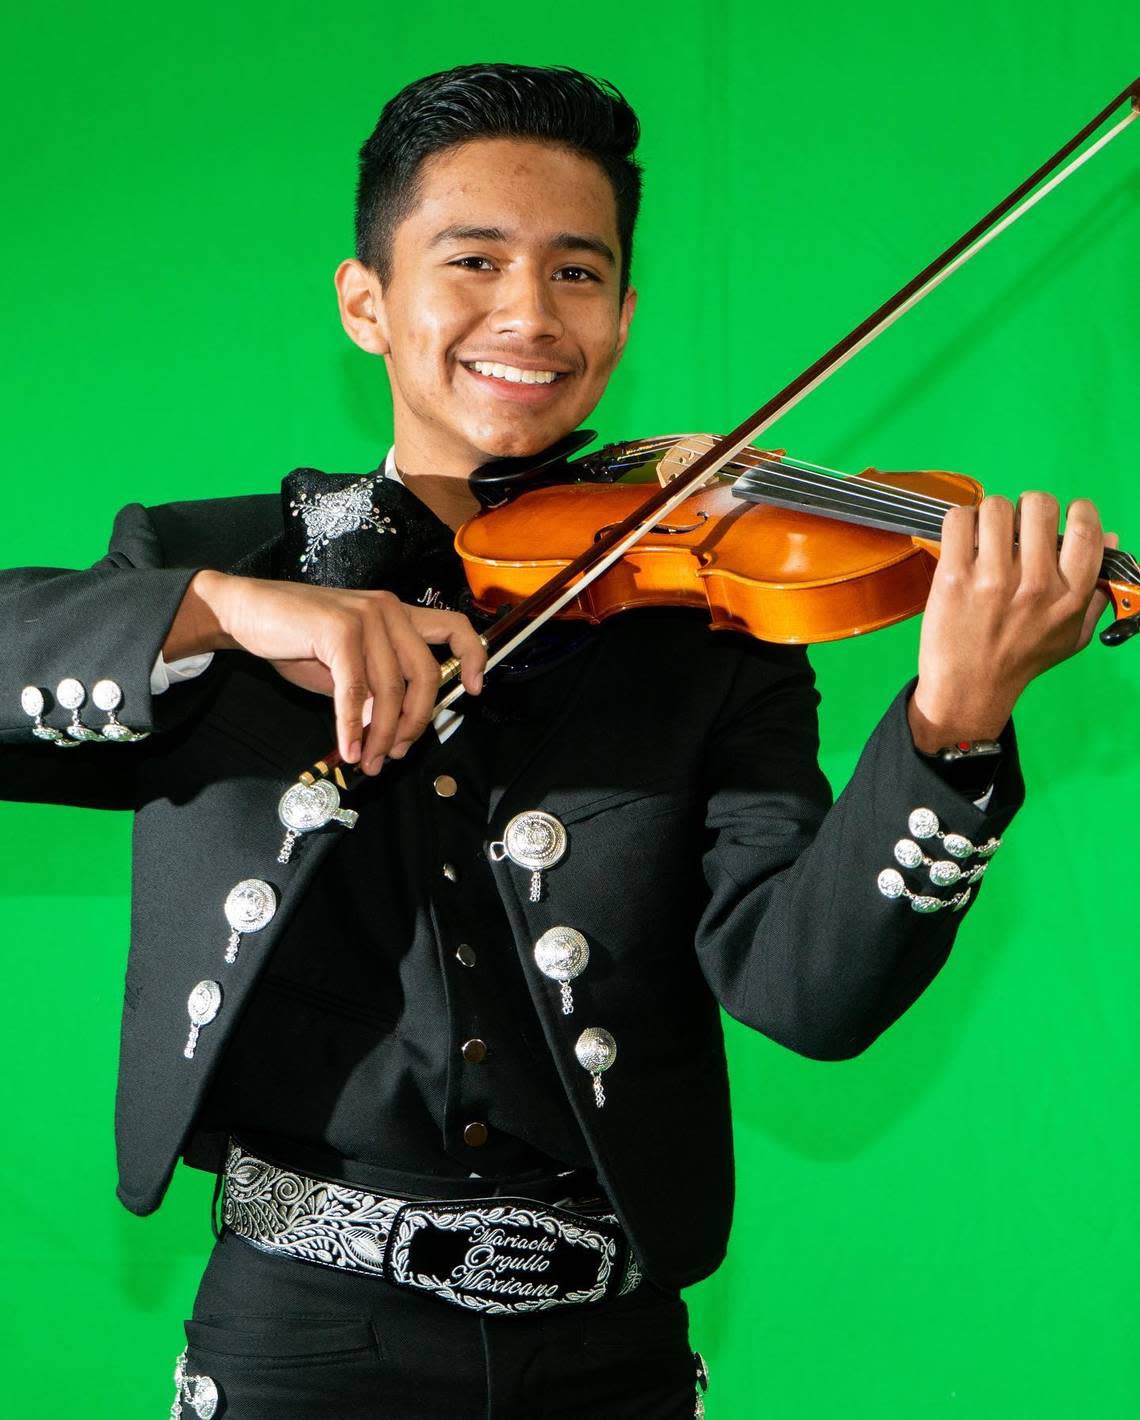 Benjamin Isaac Castañeda Floran, 17, smiles for a photo in a traditional charro outfit. The senior at North Side High School, who was killed Thanksgiving morning 2019 in a crash in North Richland Hills involving a wrong-way driver, had a passion for playing mariachi music, according to his family and friends.